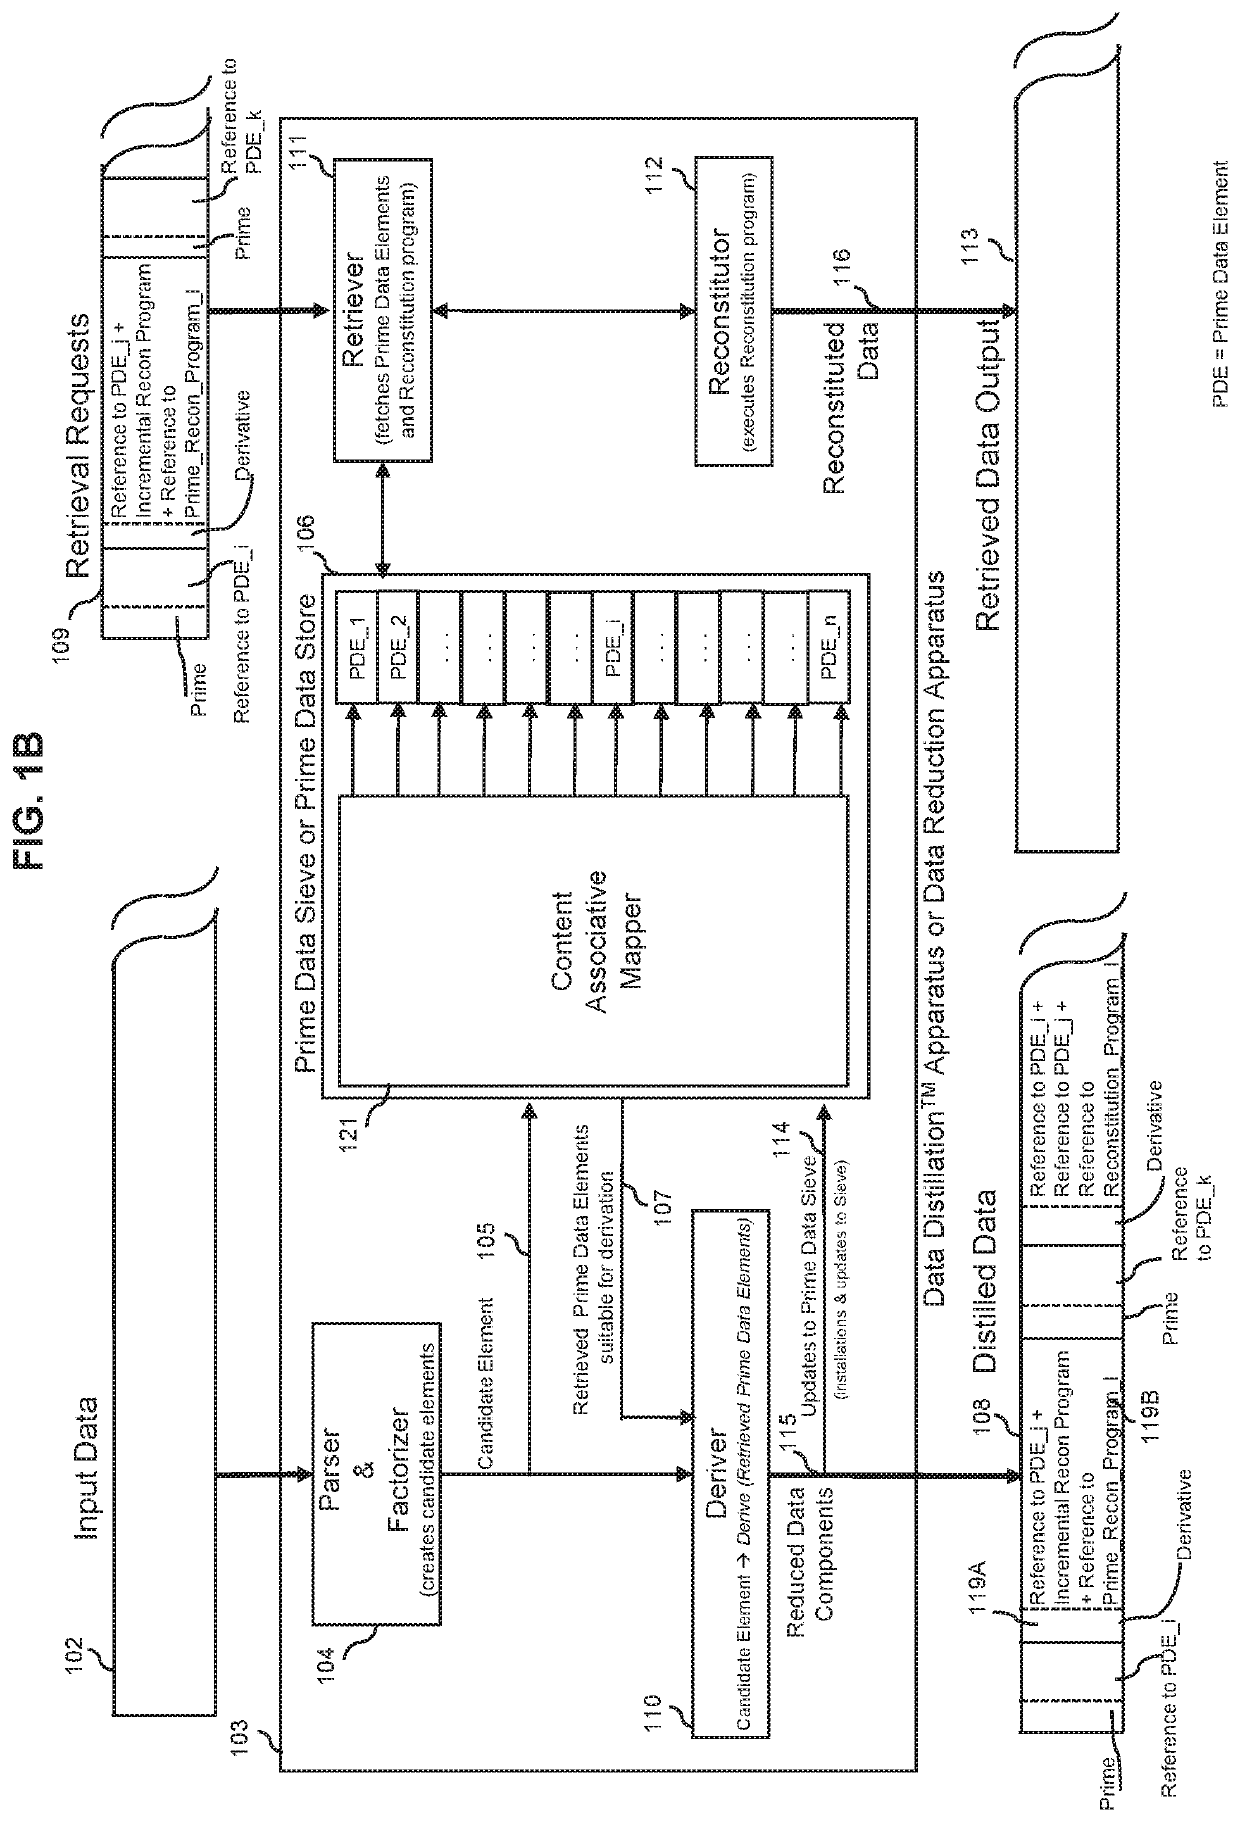 Lossless reduction of data by using a prime data sieve and performing multidimensional search and content-associative retrieval on data that has been losslessly reduced using a prime data sieve